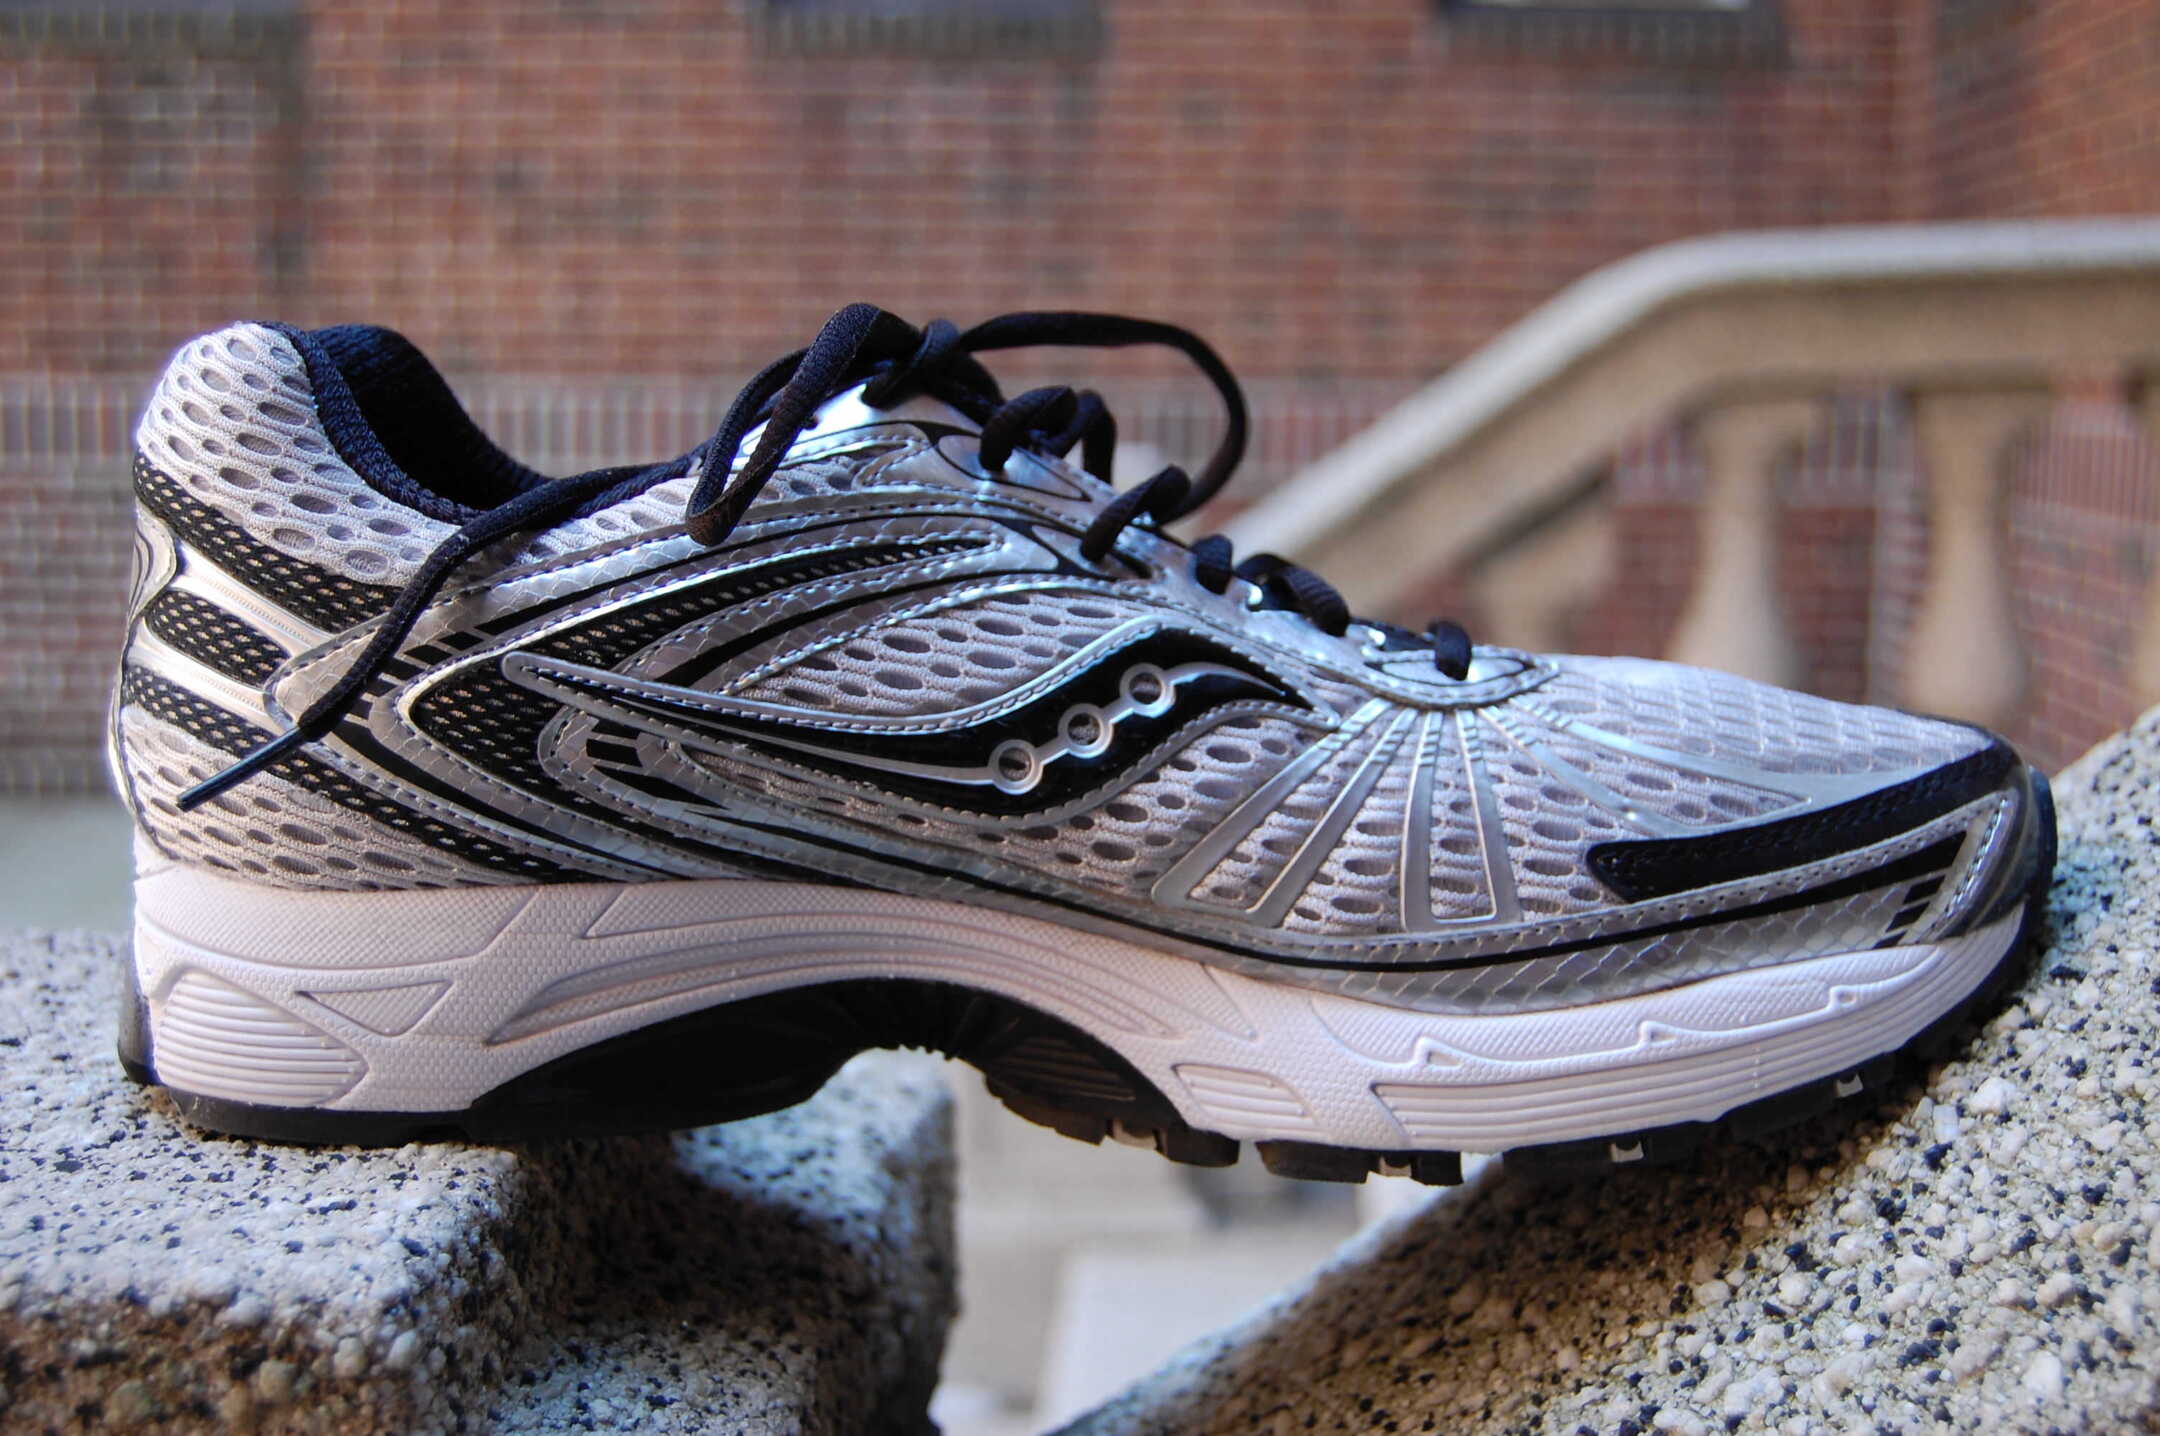 Review: Saucony Progrid Ride 4 Mens – The Ultimate Running Shoes For Men